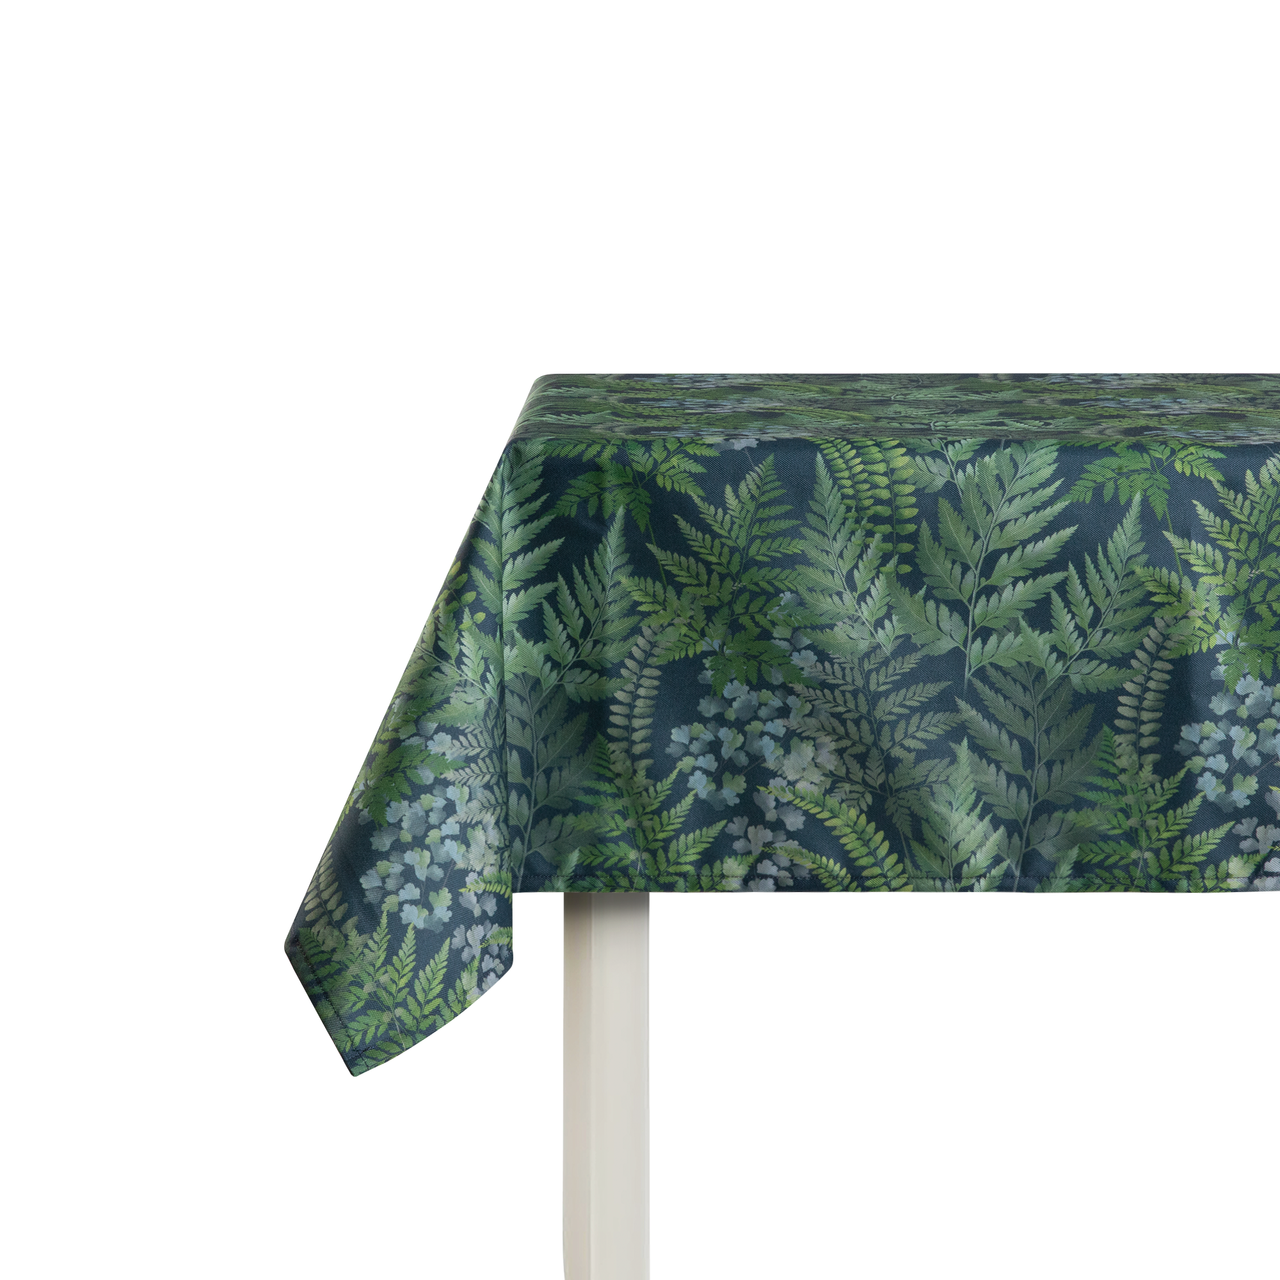 Celina Digby Luxury Outdoor Garden Tablecloth AVAILABLE IN 5 SIZES – Optional Centre Hole for Parasol Ferns MEDIUM (180cm x 140cm)